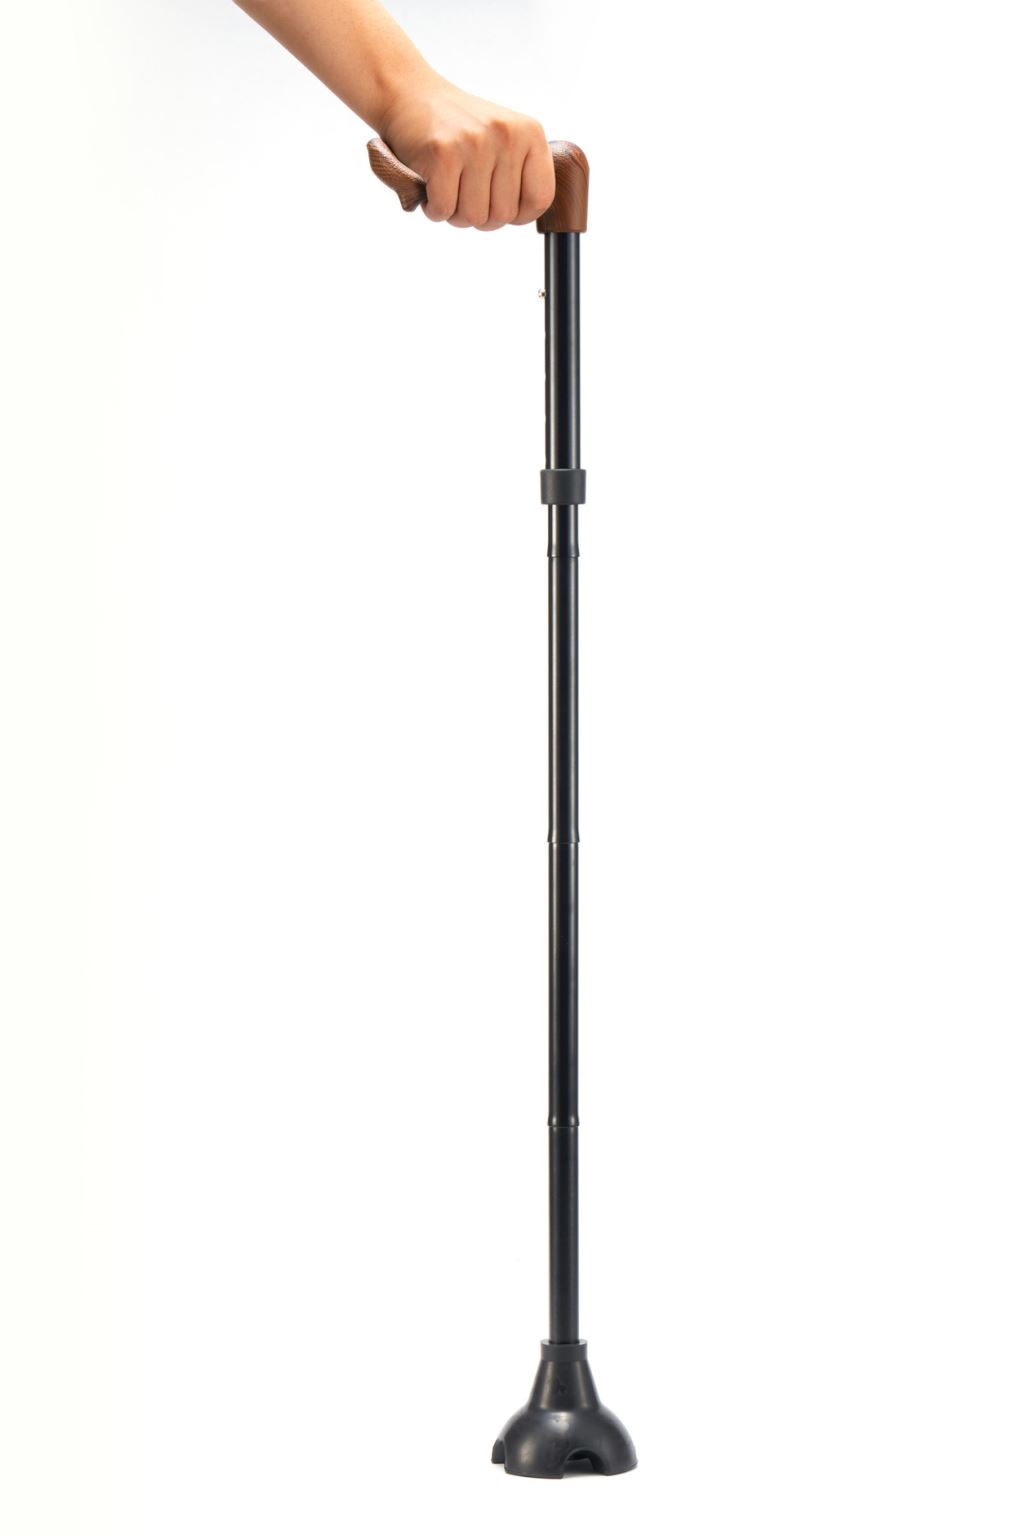 The cane stands on its own with the elastic quad base